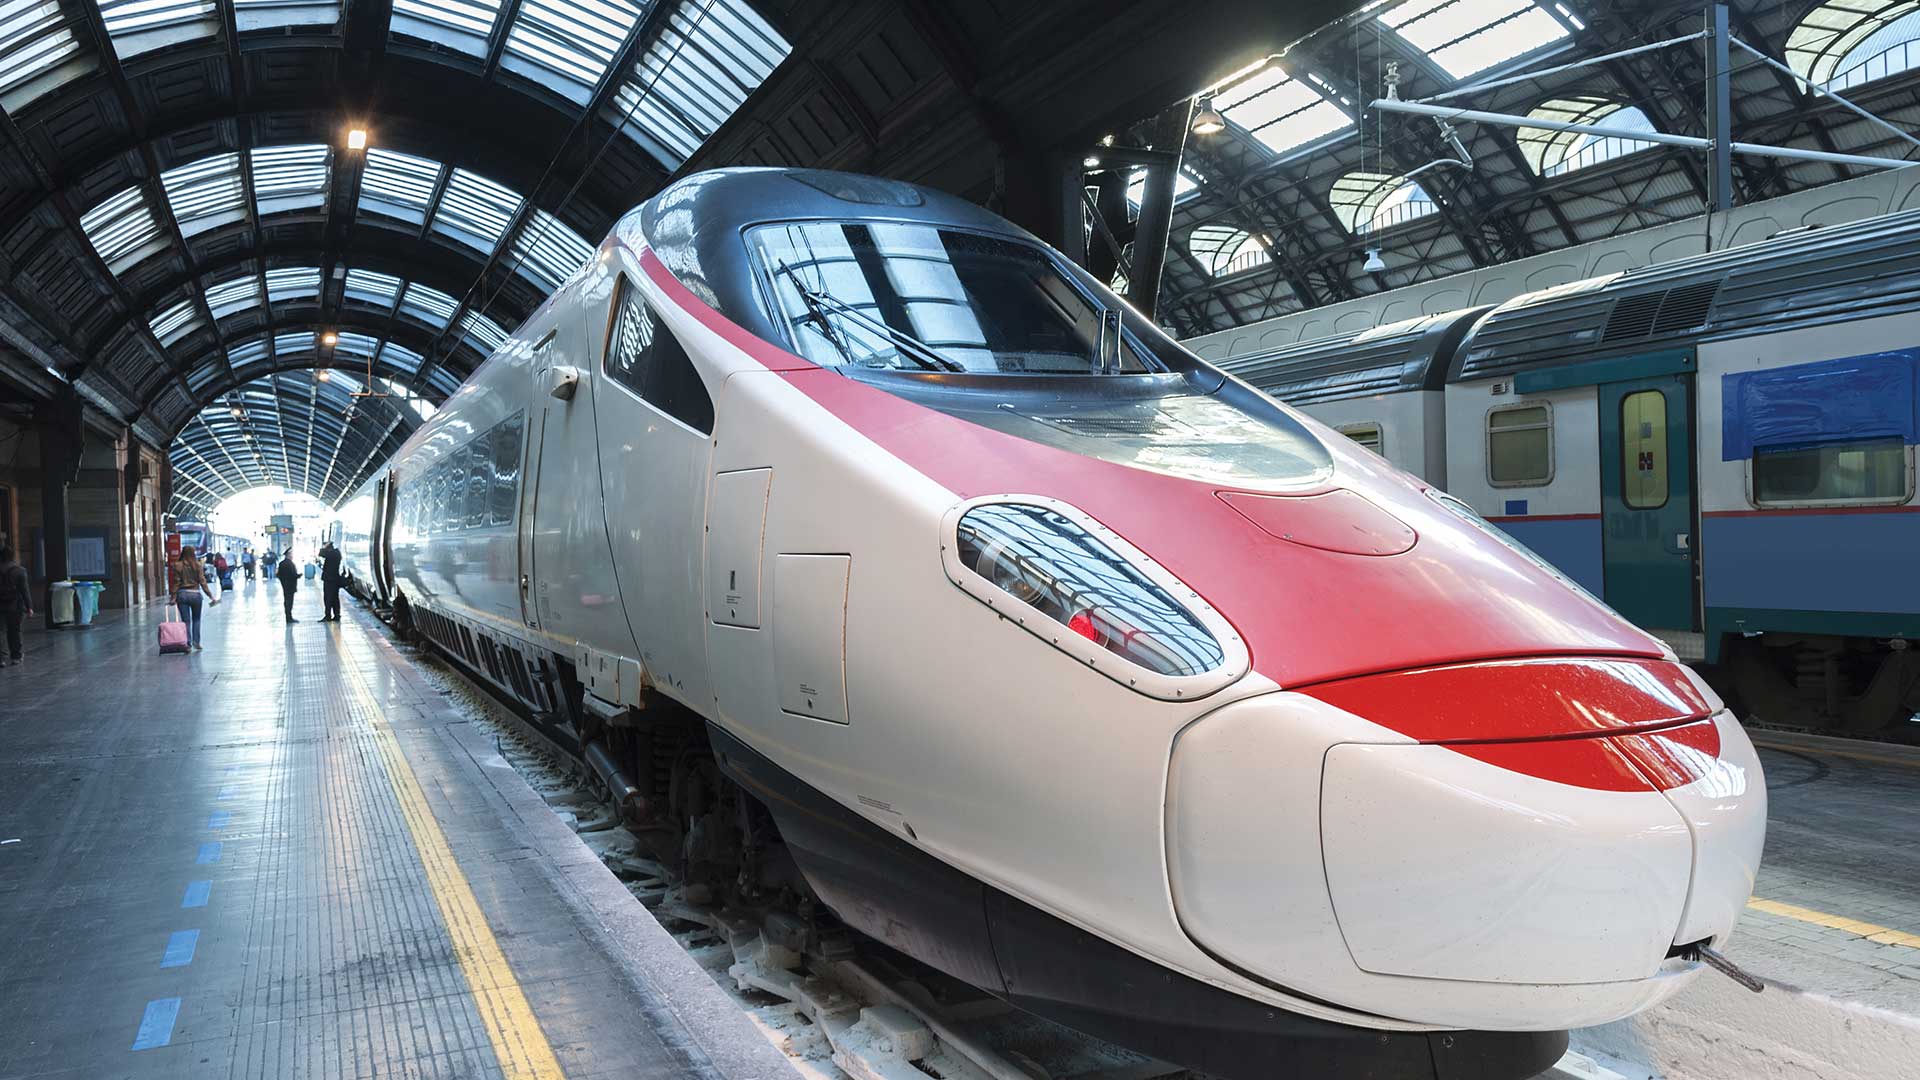 Super streamlined train in Milan central station